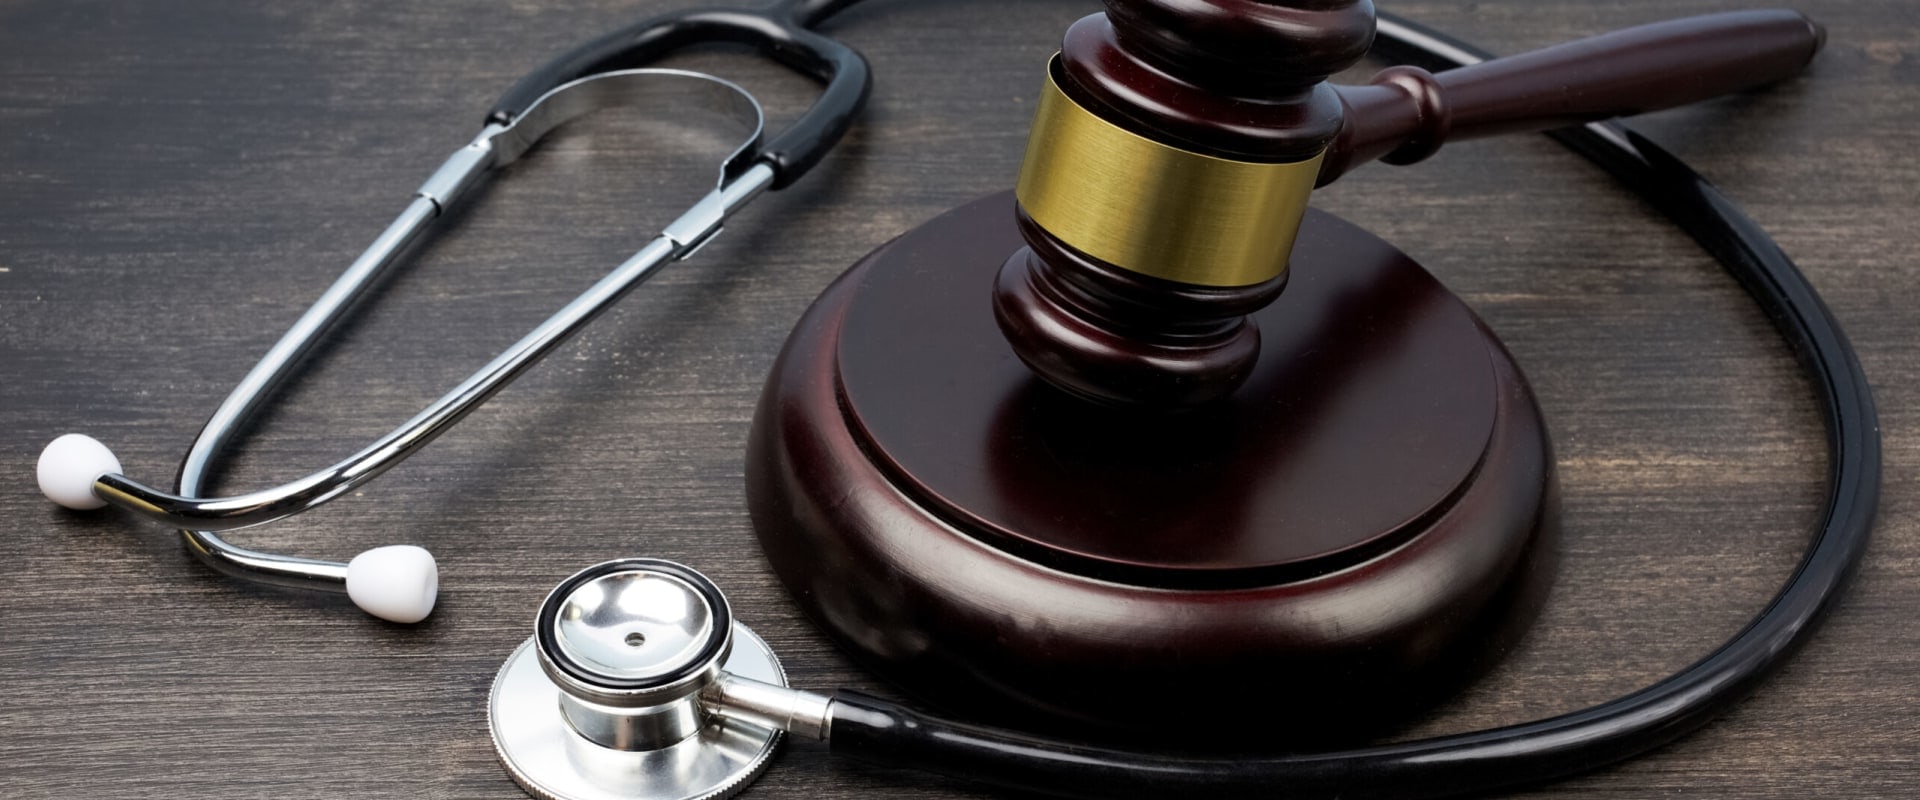 What are the four d's necessary for a successful malpractice suit?